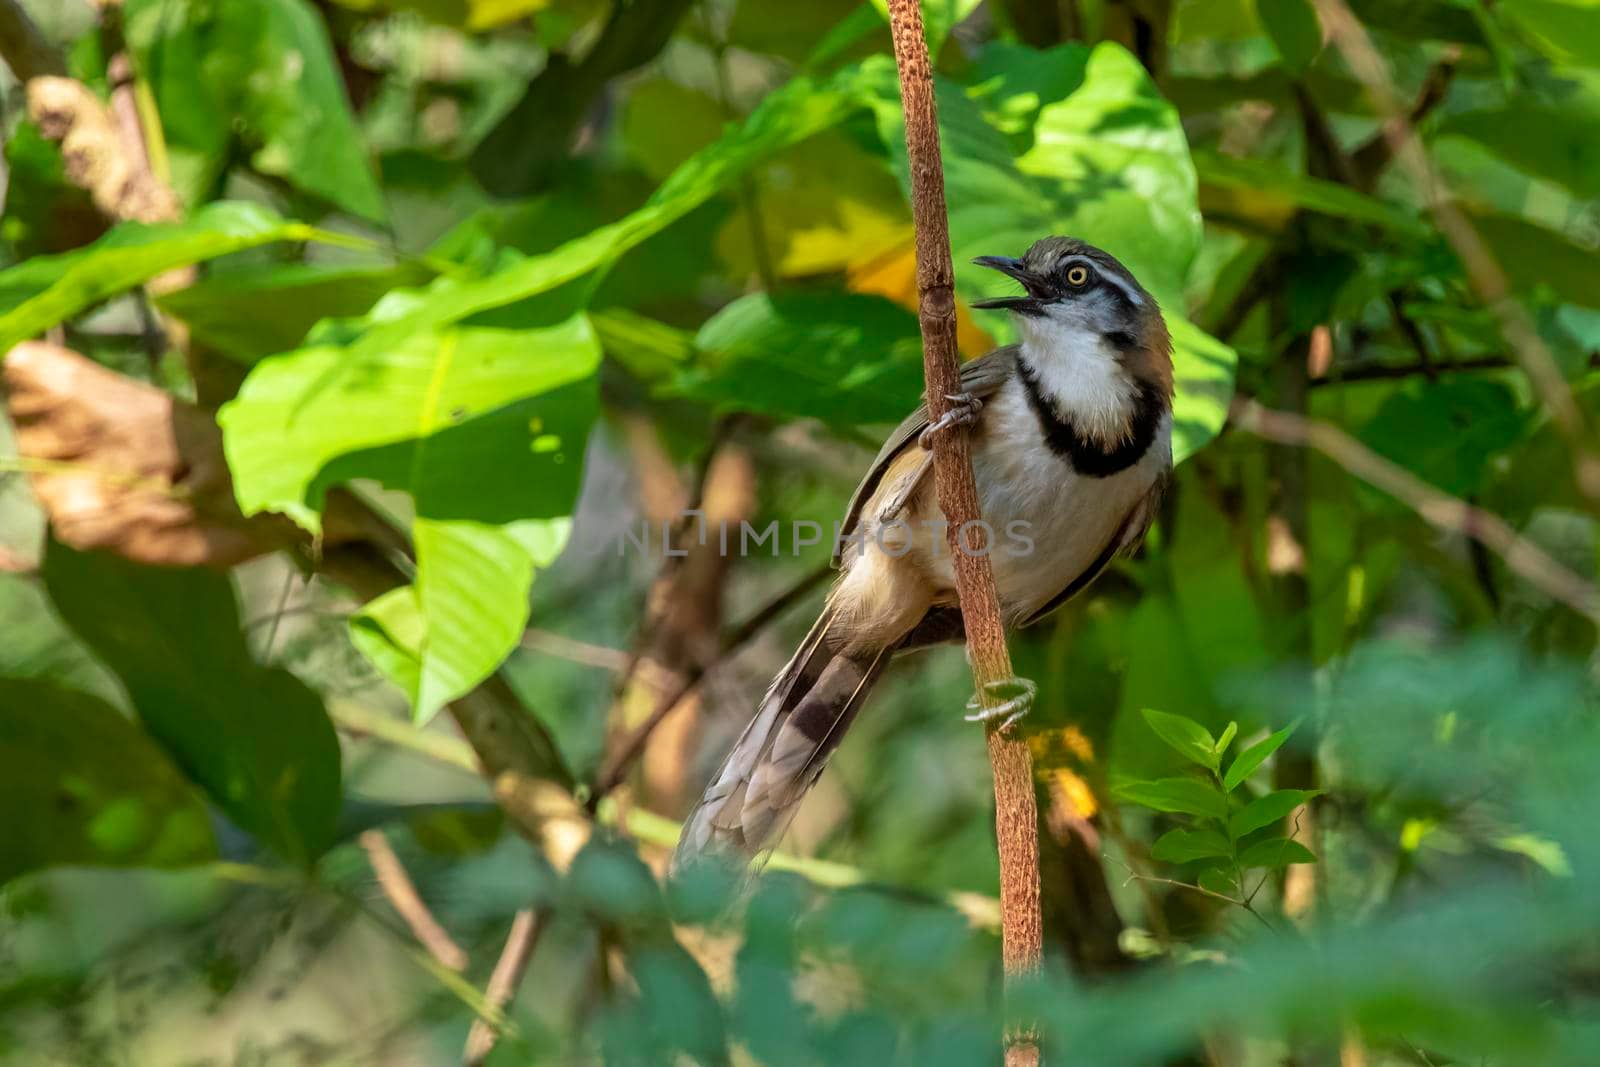 Image of Lesser Necklaced Laughingthrush (Garrulax monileger) on the tree branch on nature background. Bird. Animals.